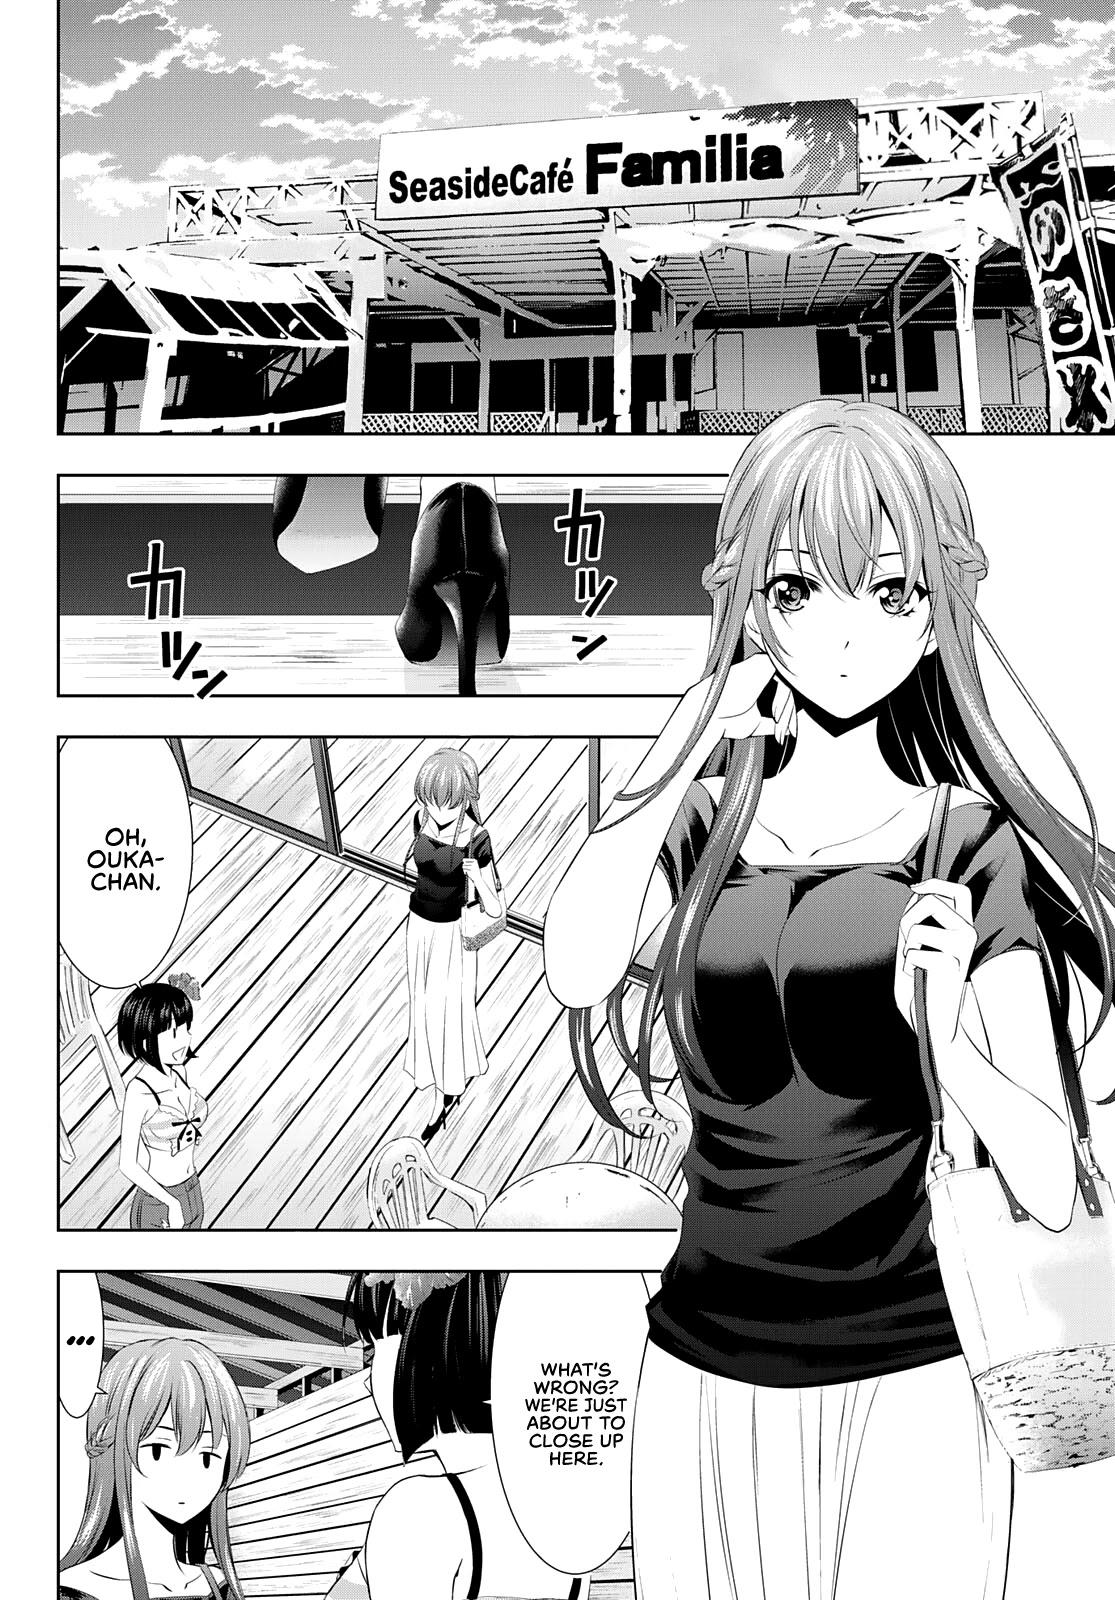 Read Goddess Café Terrace Chapter 60: An Unexpected Visitor - Manganelo